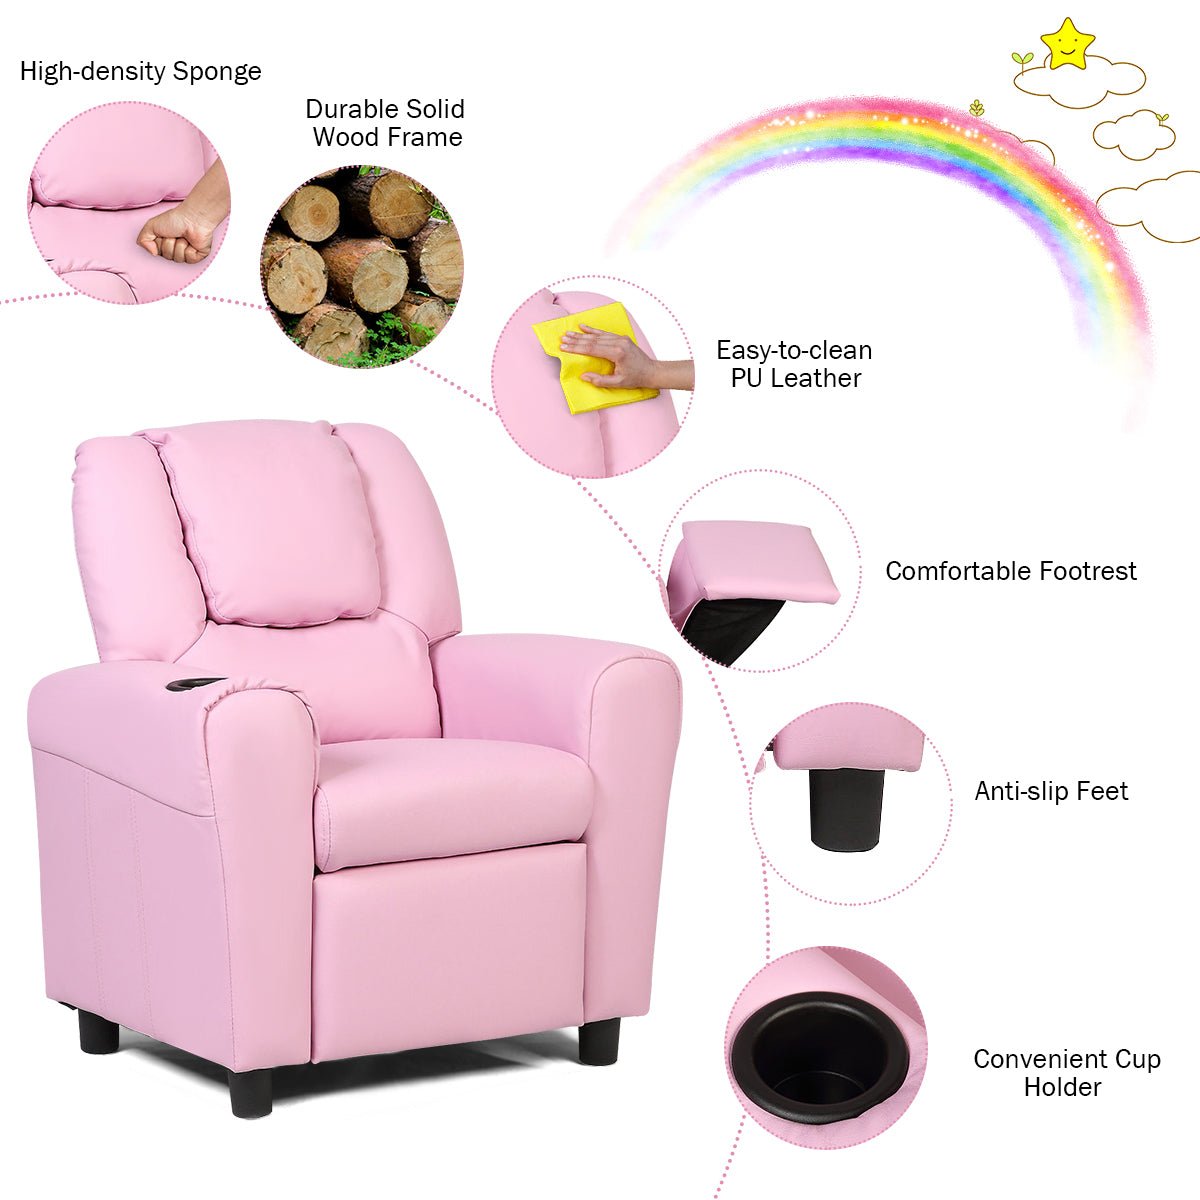 Stylish Pink Children's Recliner Chair: Relaxation and Ergonomic Support